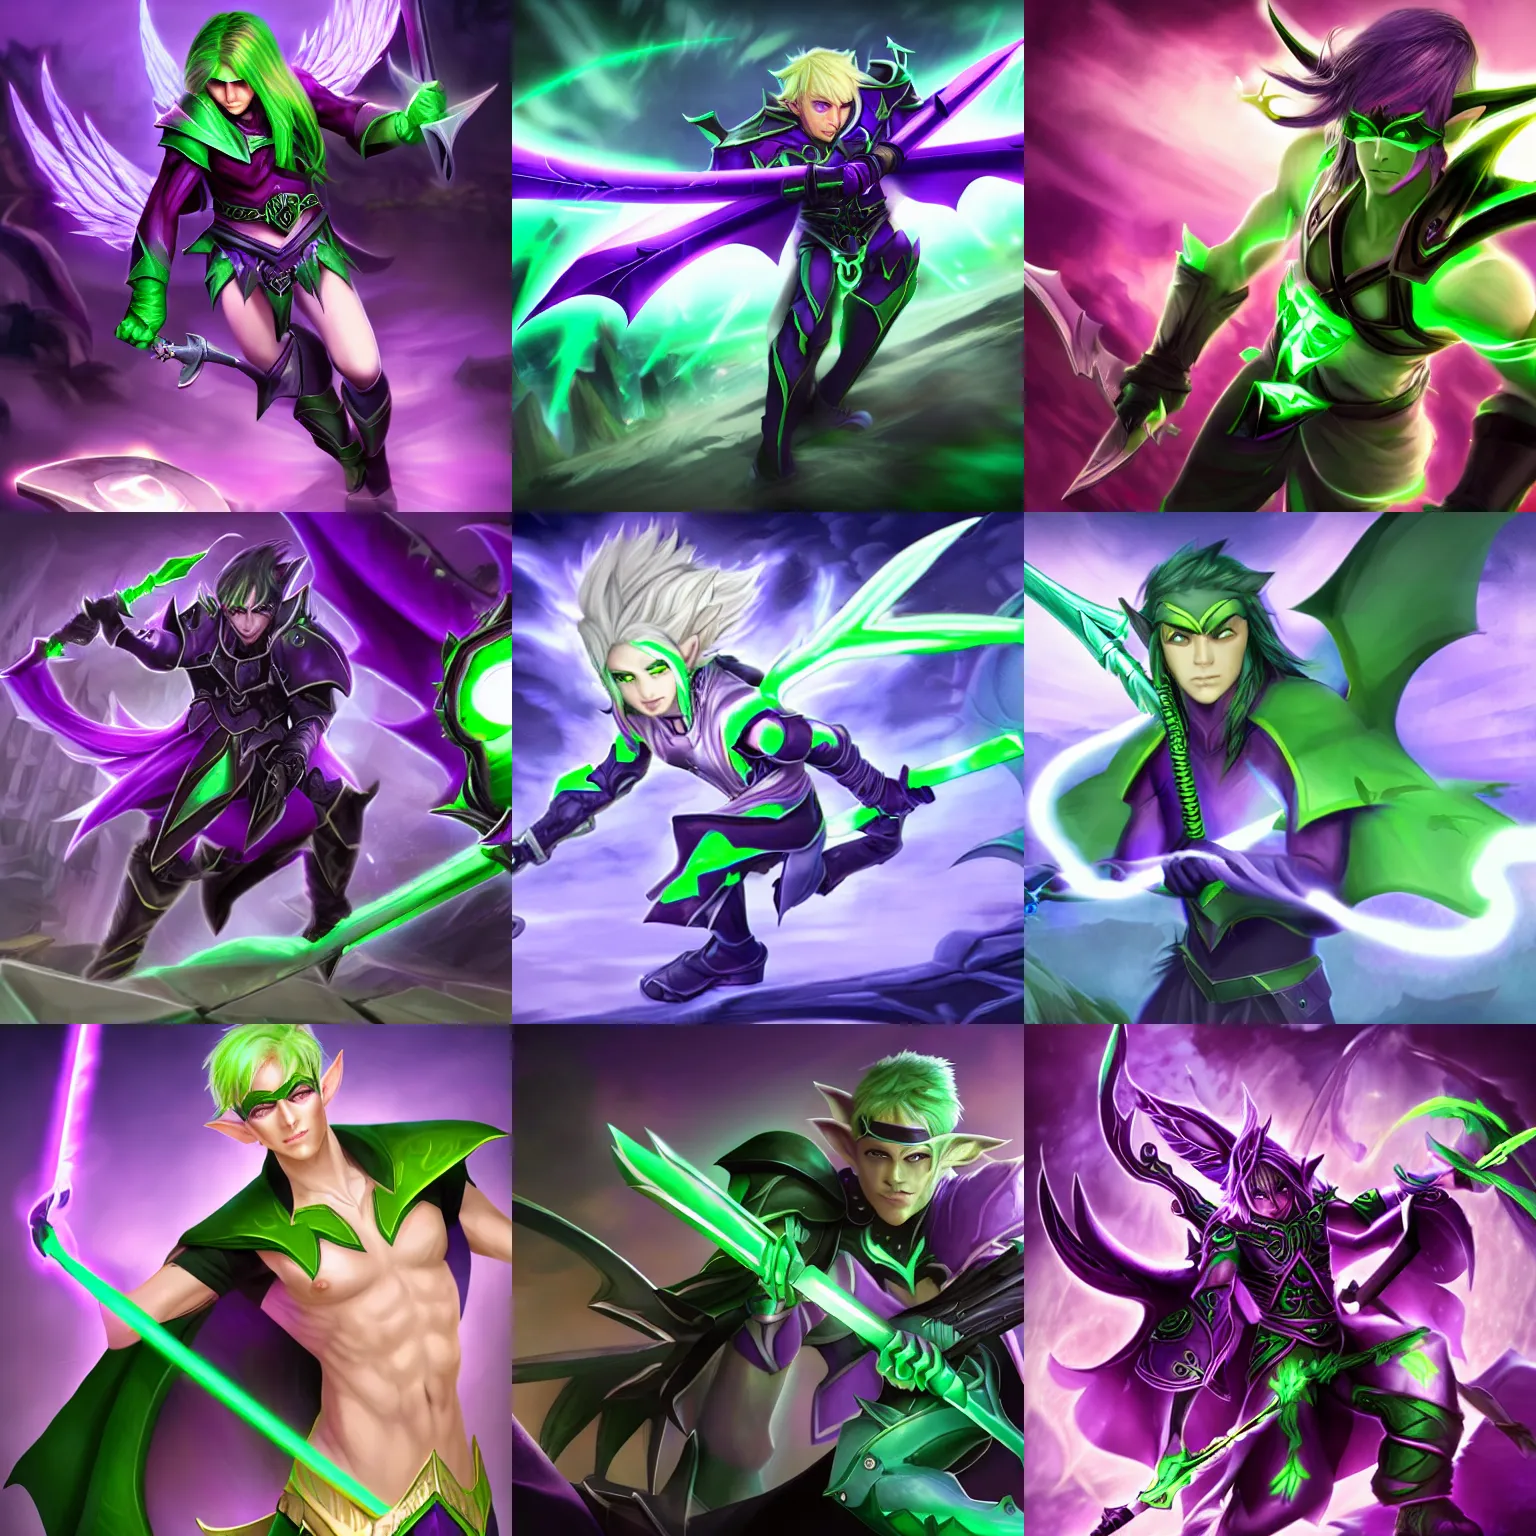 Prompt: purple skin male elf with giant bat wings, wearing a blindfold with glowing green eyes, wielding green blades, official splash art